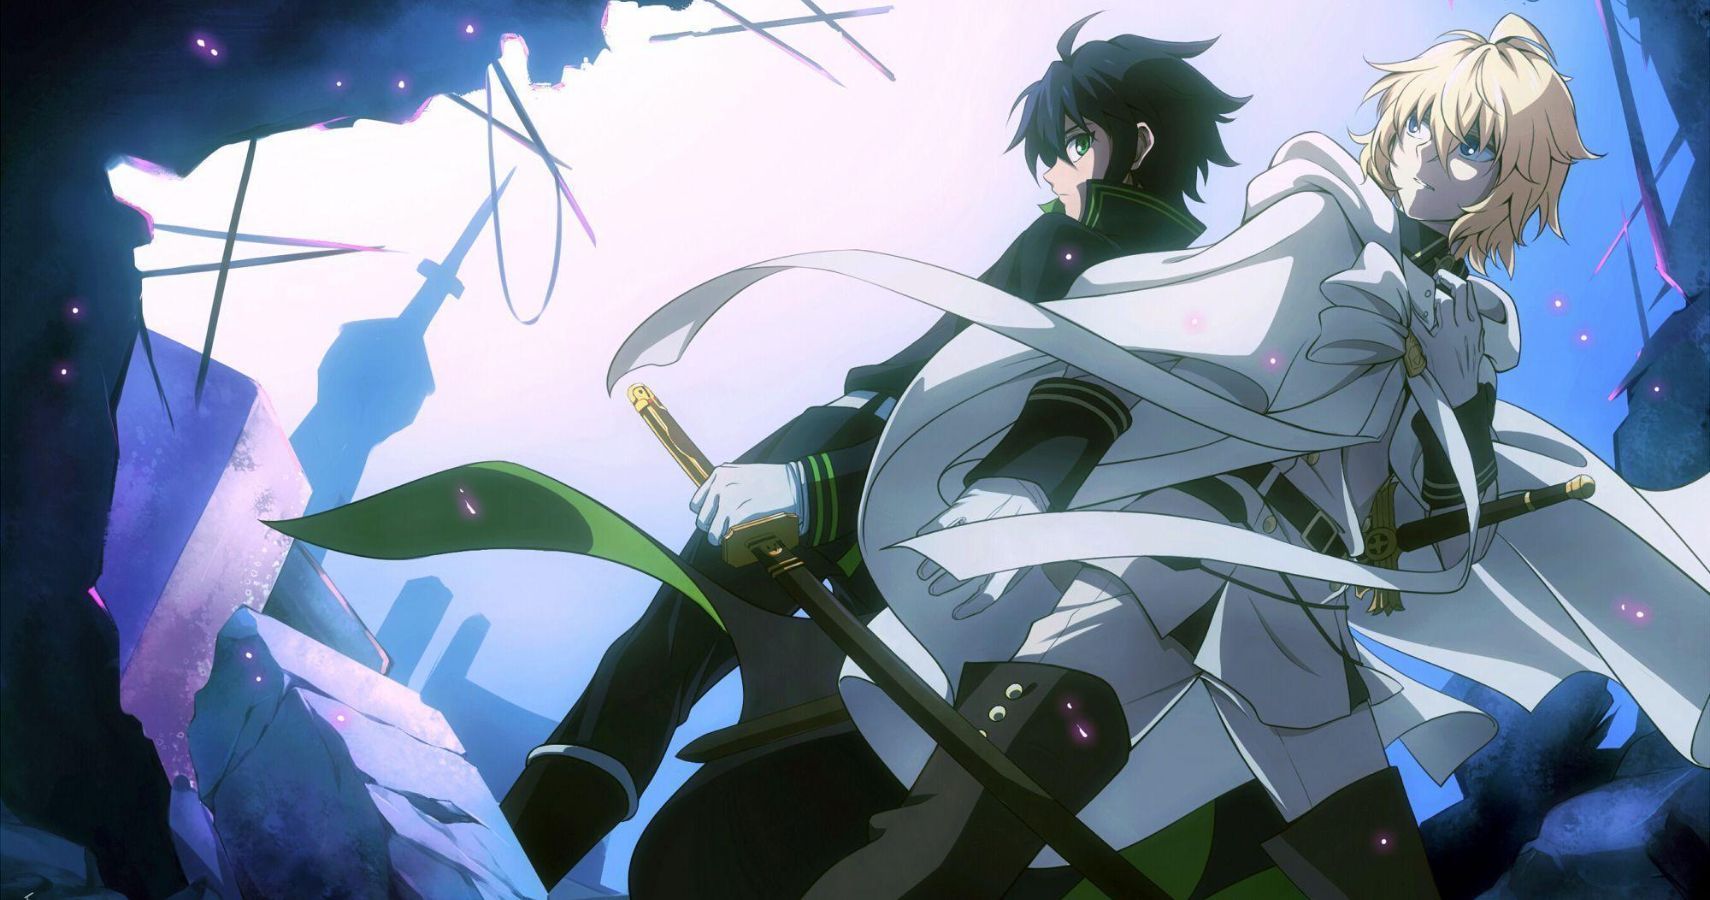 Seraph Of The End: 11 Facts You Didn't Know About Mikaela Hyakuya